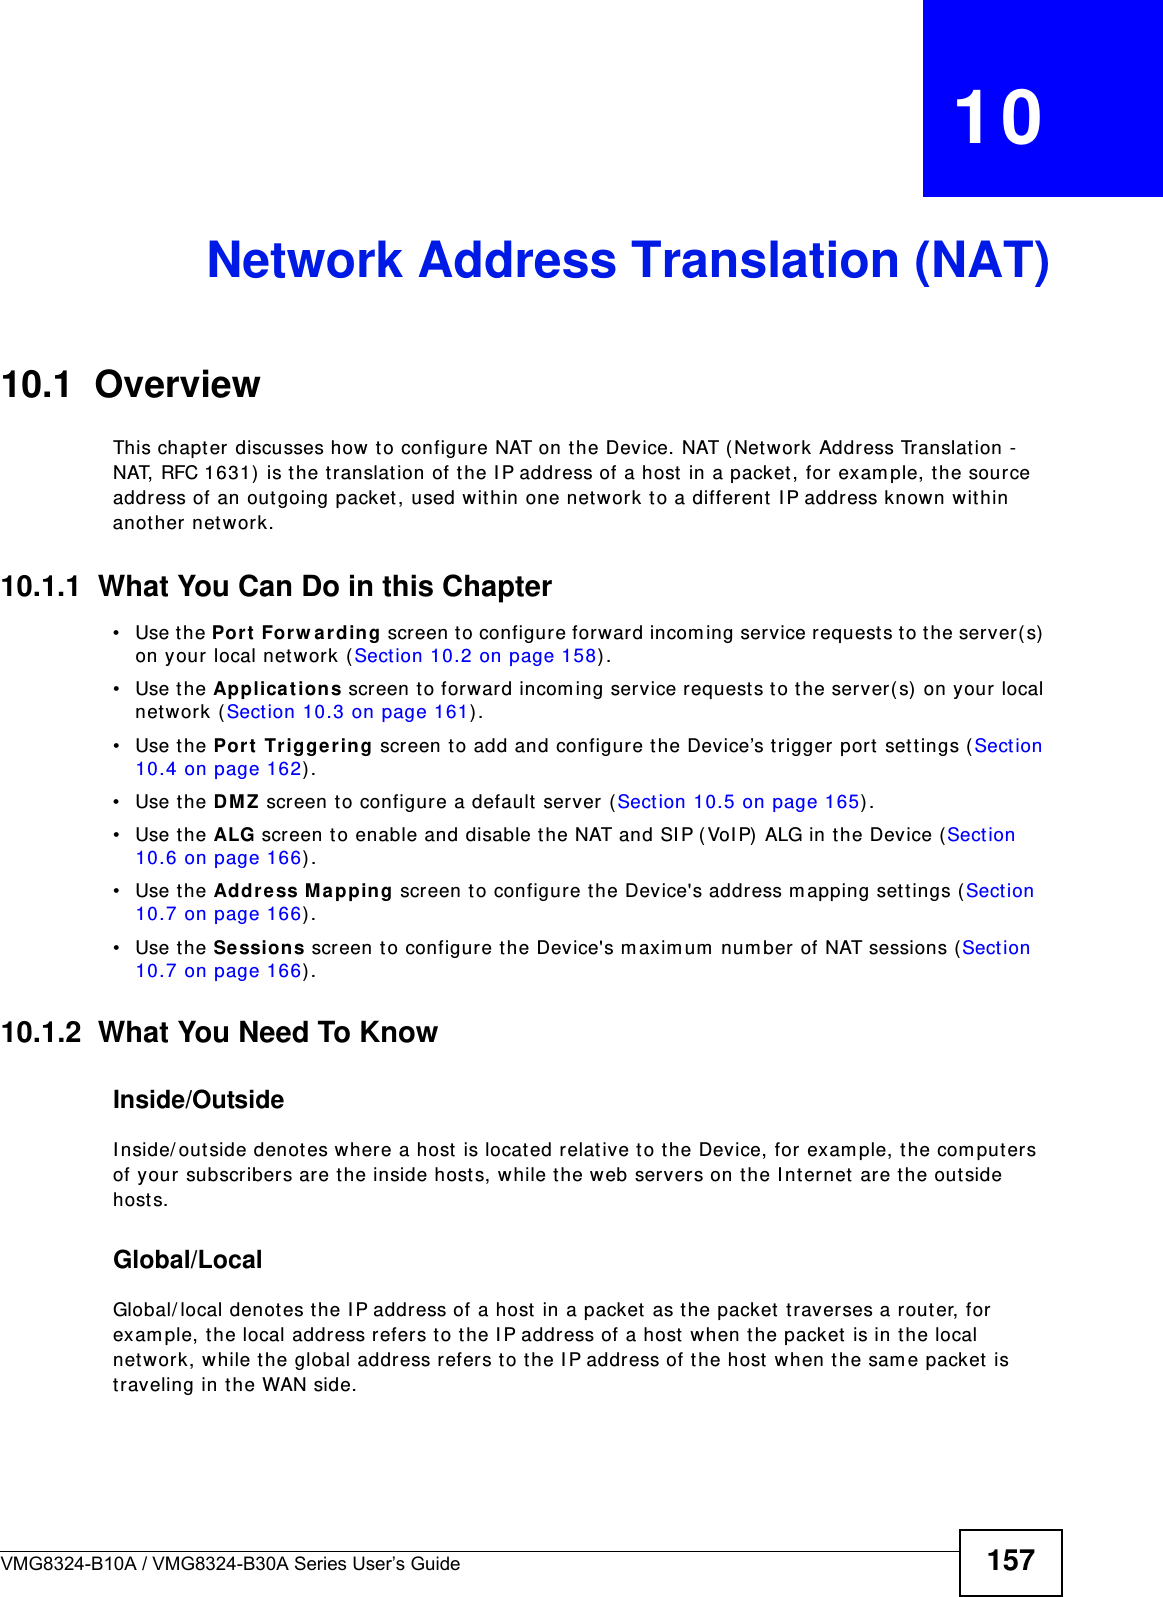 VMG8324-B10A / VMG8324-B30A Series User’s Guide 157CHAPTER   10Network Address Translation (NAT)10.1  OverviewThis chapt er discusses how to configure NAT on t he Device. NAT ( Net work Address Translation -  NAT, RFC 1631)  is t he t ranslation of t he I P address of a host  in a packet , for exam ple, t he sour ce address of an out going packet , used wit hin one net work to a different  I P address known wit hin another network.10.1.1  What You Can Do in this Chapter• Use the Port  For w arding screen t o configure forward incom ing service requests t o t he server( s)  on your local network ( Sect ion 10.2 on page 158) . • Use the Ap plica t ion s scr een t o forward incom ing service requests to the server(s)  on your local net work ( Sect ion 10.3 on page 161) .• Use the Port  Trigge r ing screen t o add and configure the Device’s t rigger port  sett ings ( Sect ion 10.4 on page 162) .• Use the D M Z screen to configure a default  server (Section 10.5 on page 165) .• Use the ALG screen to enable and disable t he NAT and SI P (VoI P)  ALG in the Device (Sect ion 10.6 on page 166) .• Use the Address M apping screen to configure the Device&apos;s addr ess m apping set t ings ( Sect ion 10.7 on page 166) . • Use the Sessions screen to configure the Device&apos;s m axim um  num ber of NAT sessions (Sect ion 10.7 on page 166) . 10.1.2  What You Need To KnowInside/OutsideI nside/ outside denot es where a host  is locat ed relat ive t o t he Device, for exam ple, t he com put ers of your subscribers are the inside host s, while t he web servers on t he I nt ernet  are t he out side host s. Global/LocalGlobal/ local denot es t he I P address of a host  in a packet as t he packet t raverses a rout er, for exam ple, t he local address refers t o the I P address of a host when the packet  is in t he local net work, while t he global address refers to the I P address of t he host  when t he sam e packet is traveling in t he WAN side. 